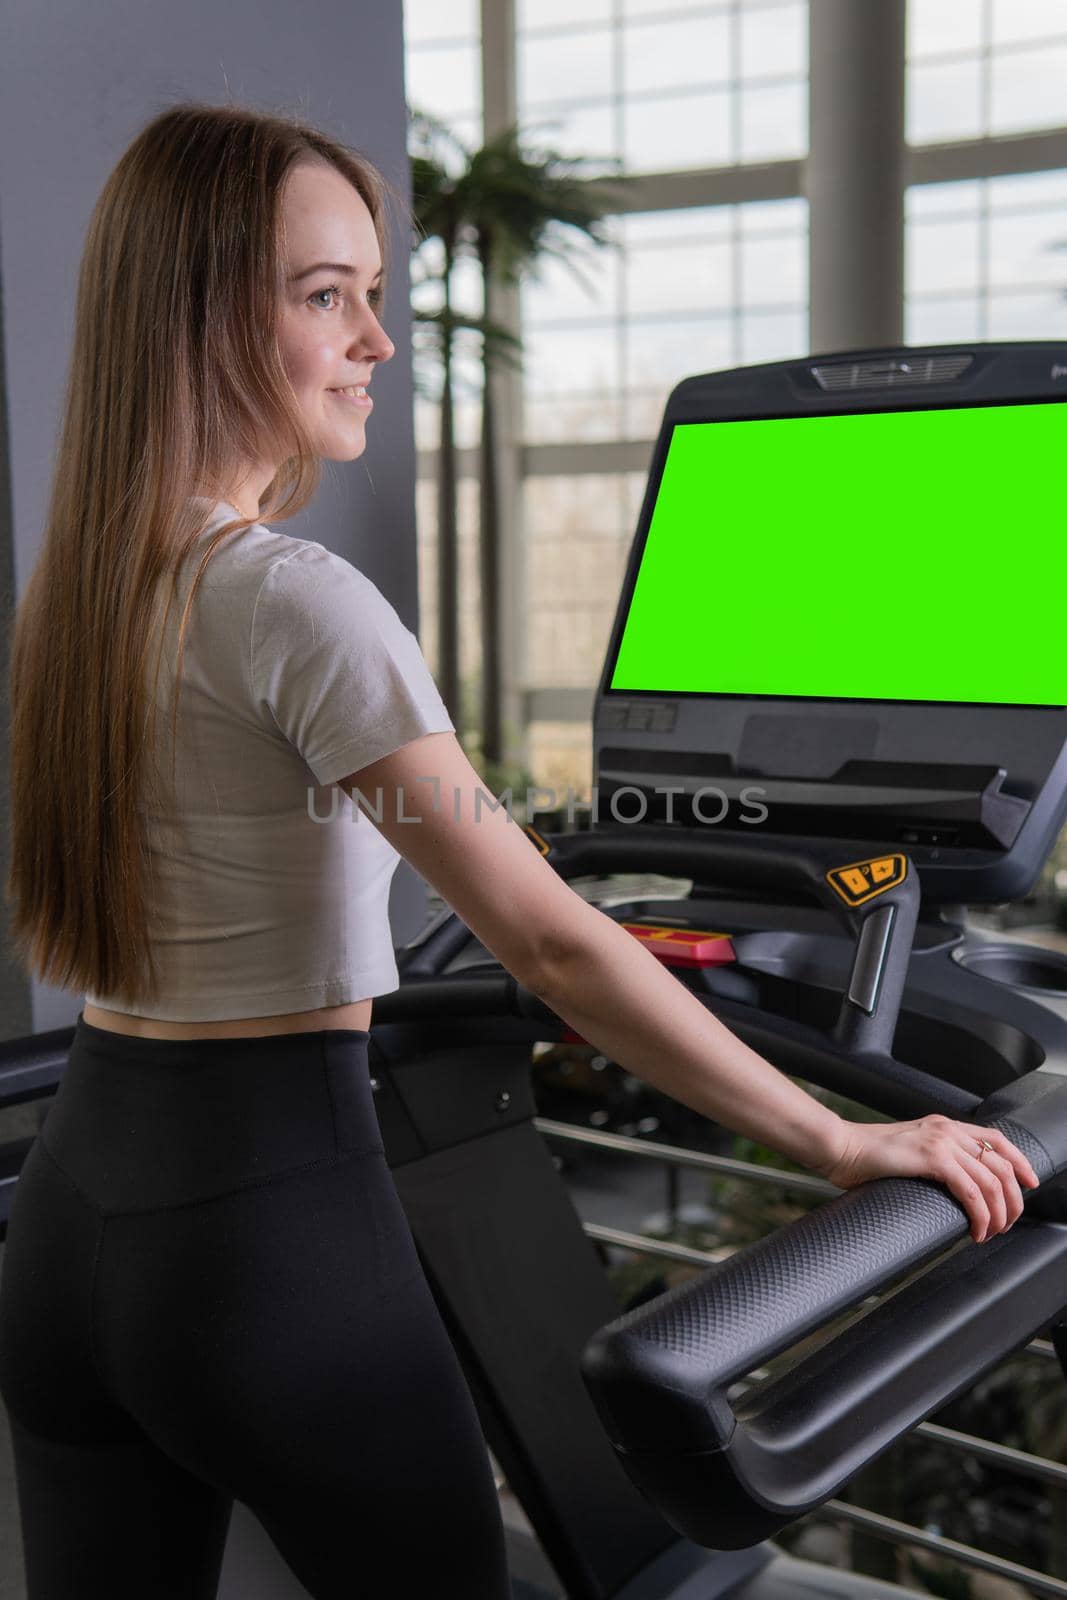 Treadmill indoors woman young length profile full running sport, concept healthy lifestyle lifestyle healthy from health from machine gym, muscles together. White care slim, green screen by 89167702191